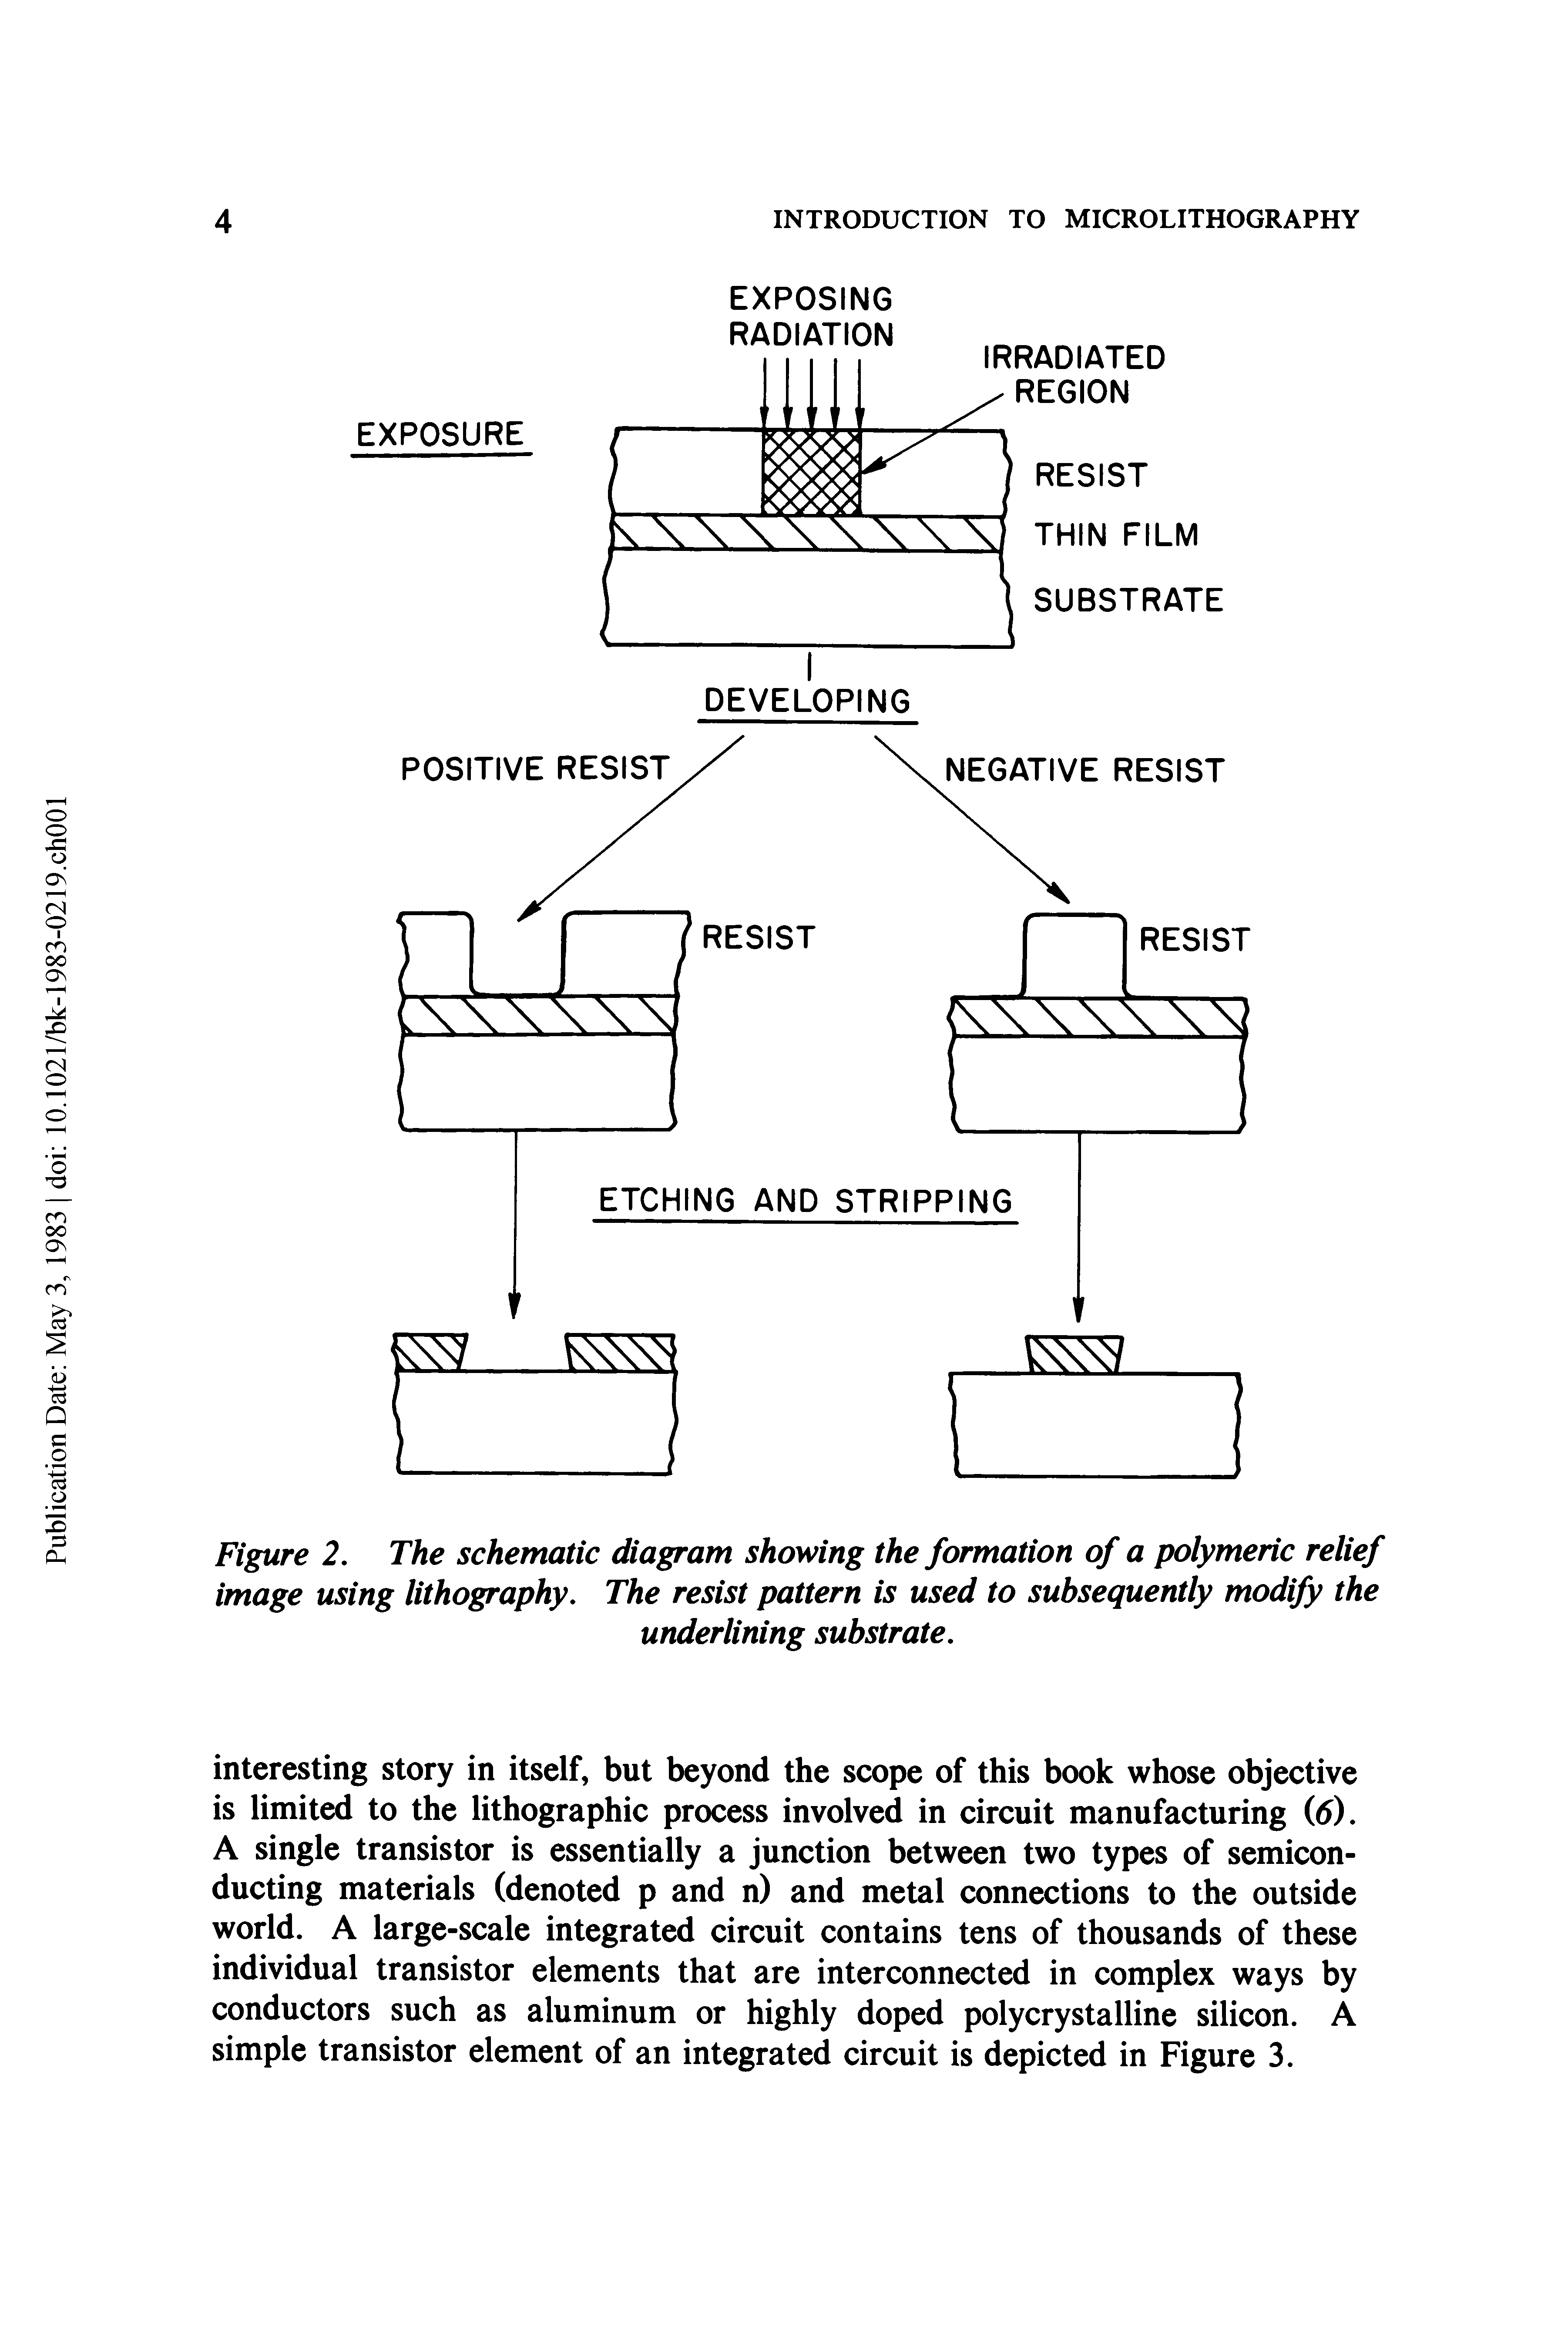 Figure 2. The schematic diagram showing the formation of a polymeric relief image using lithography. The resist pattern is used to subsequently modify the...